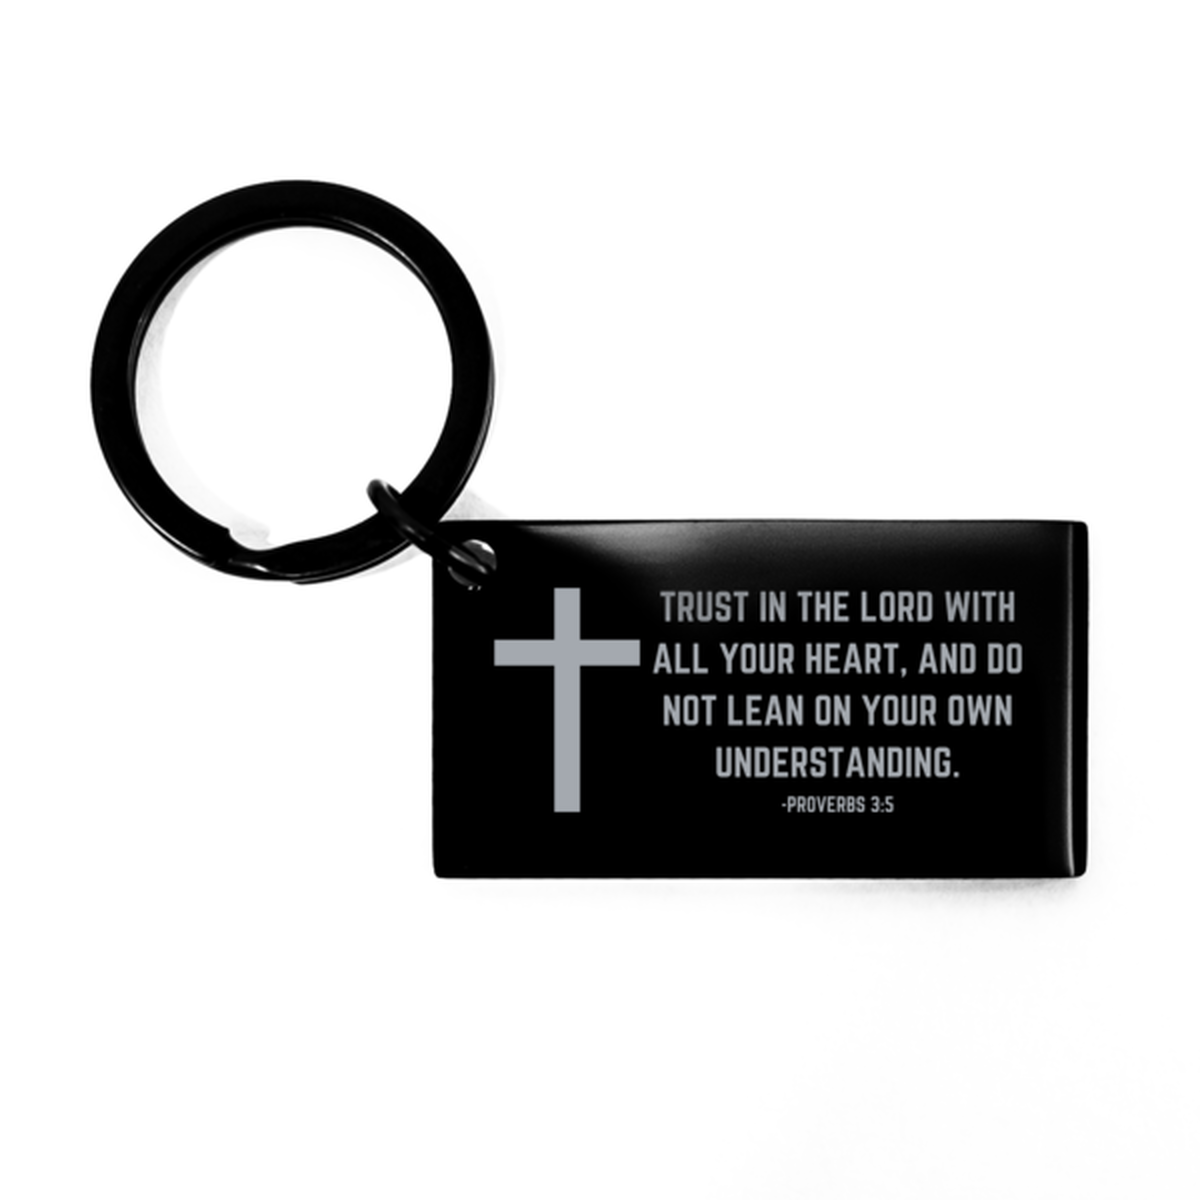 Baptism Gifts For Teenage Boys Girls, Christian Bible Verse Black Keychain, Trust in the Lord with all your heart, Confirmation Gifts, Bible Verse Keyring for Son, Godson, Grandson, Nephew